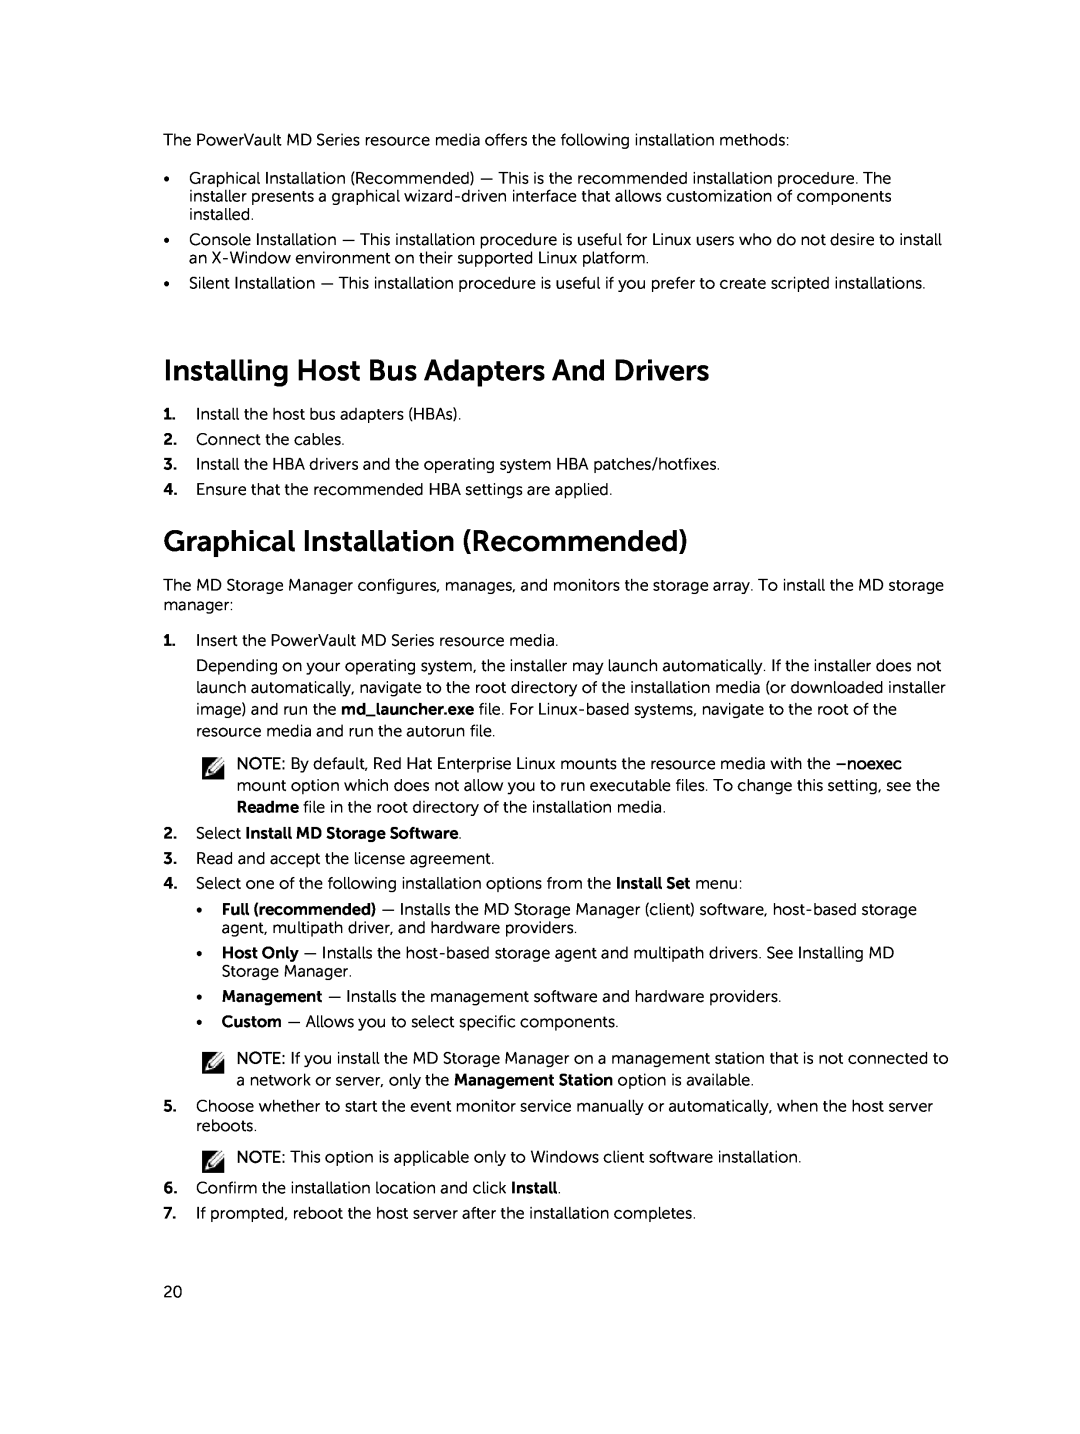 Dell MD3460 manual Installing Host Bus Adapters And Drivers, Graphical Installation Recommended 